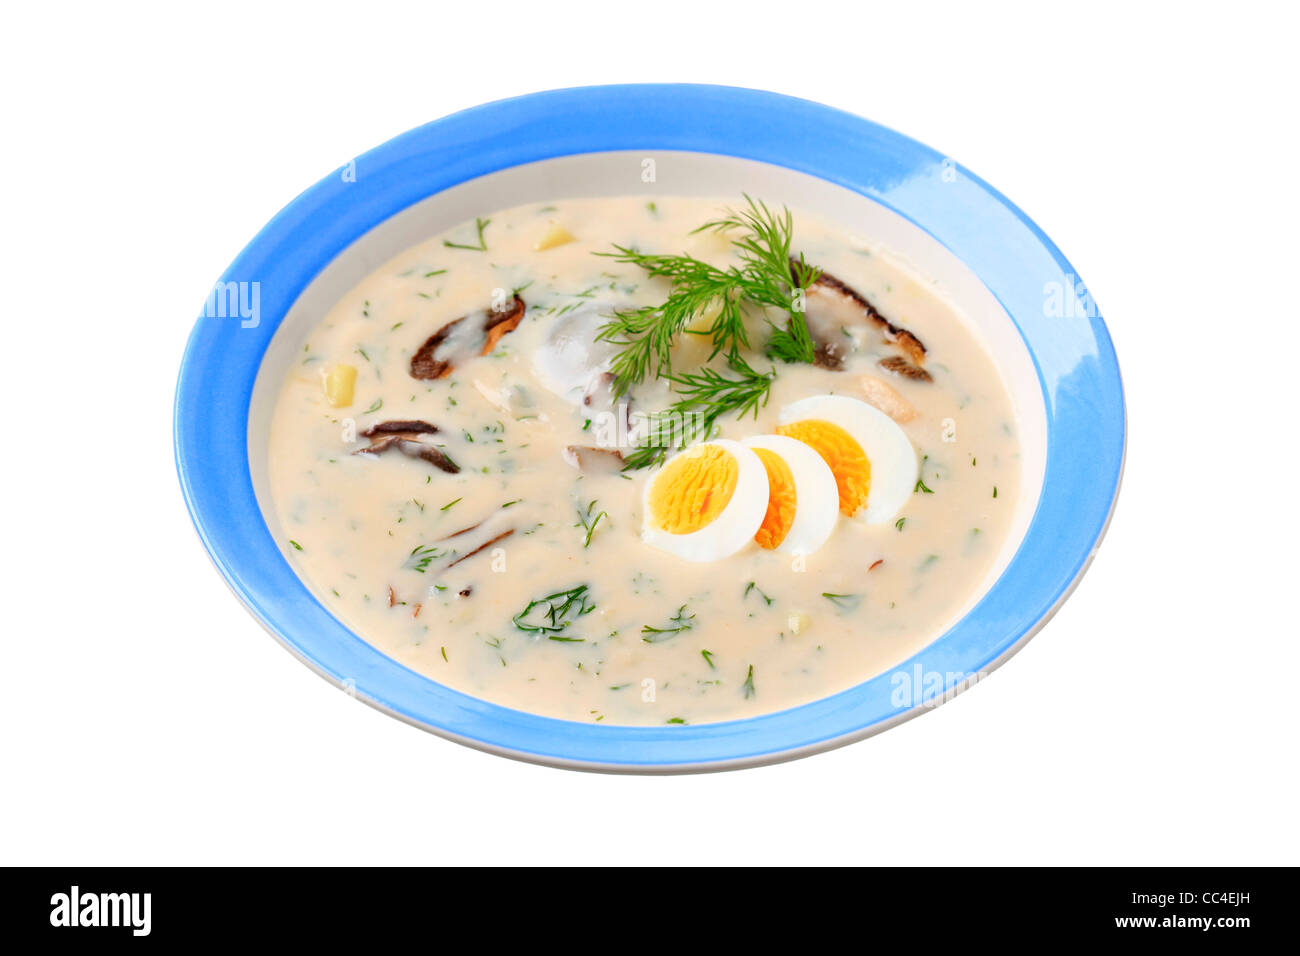 Cream soup with dill, mushrooms, potatoes and boiled egg - traditional Czech cuisine Stock Photo